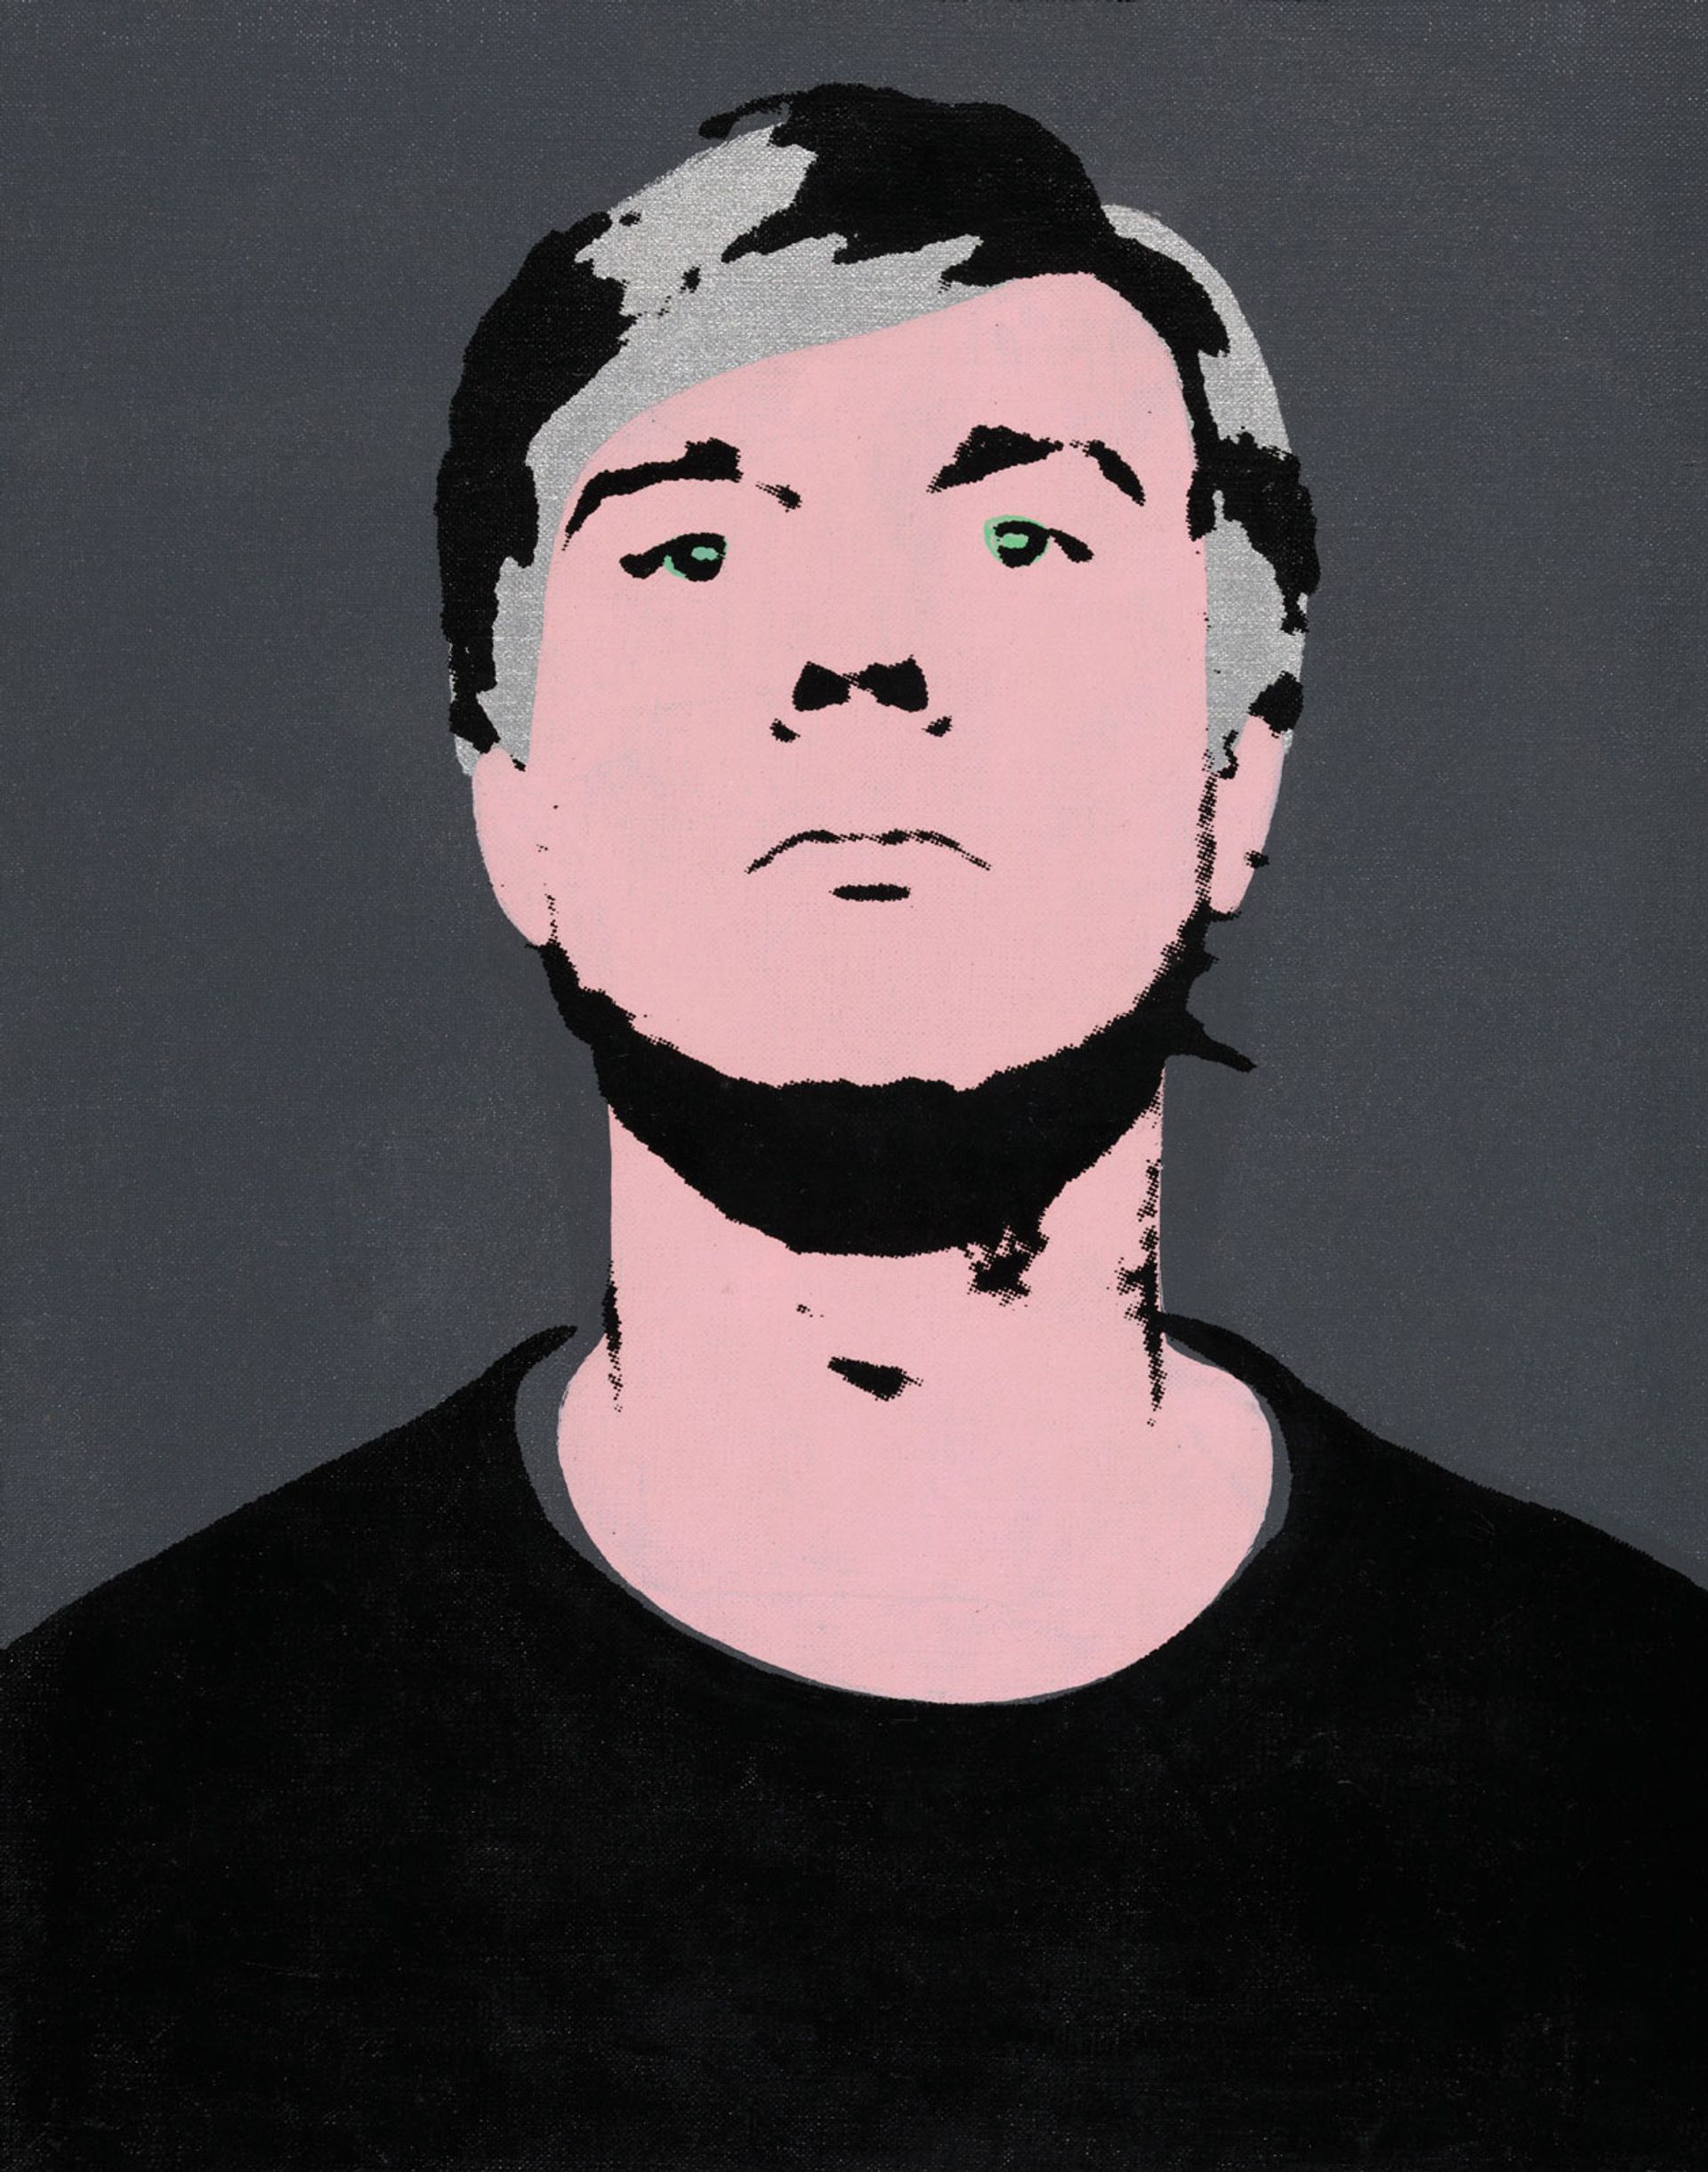 Warhol's acrylic and silkscreen ink Self-Portrait (1964) © The Andy Warhol Foundation for the Visual Arts/Artists Rights Society